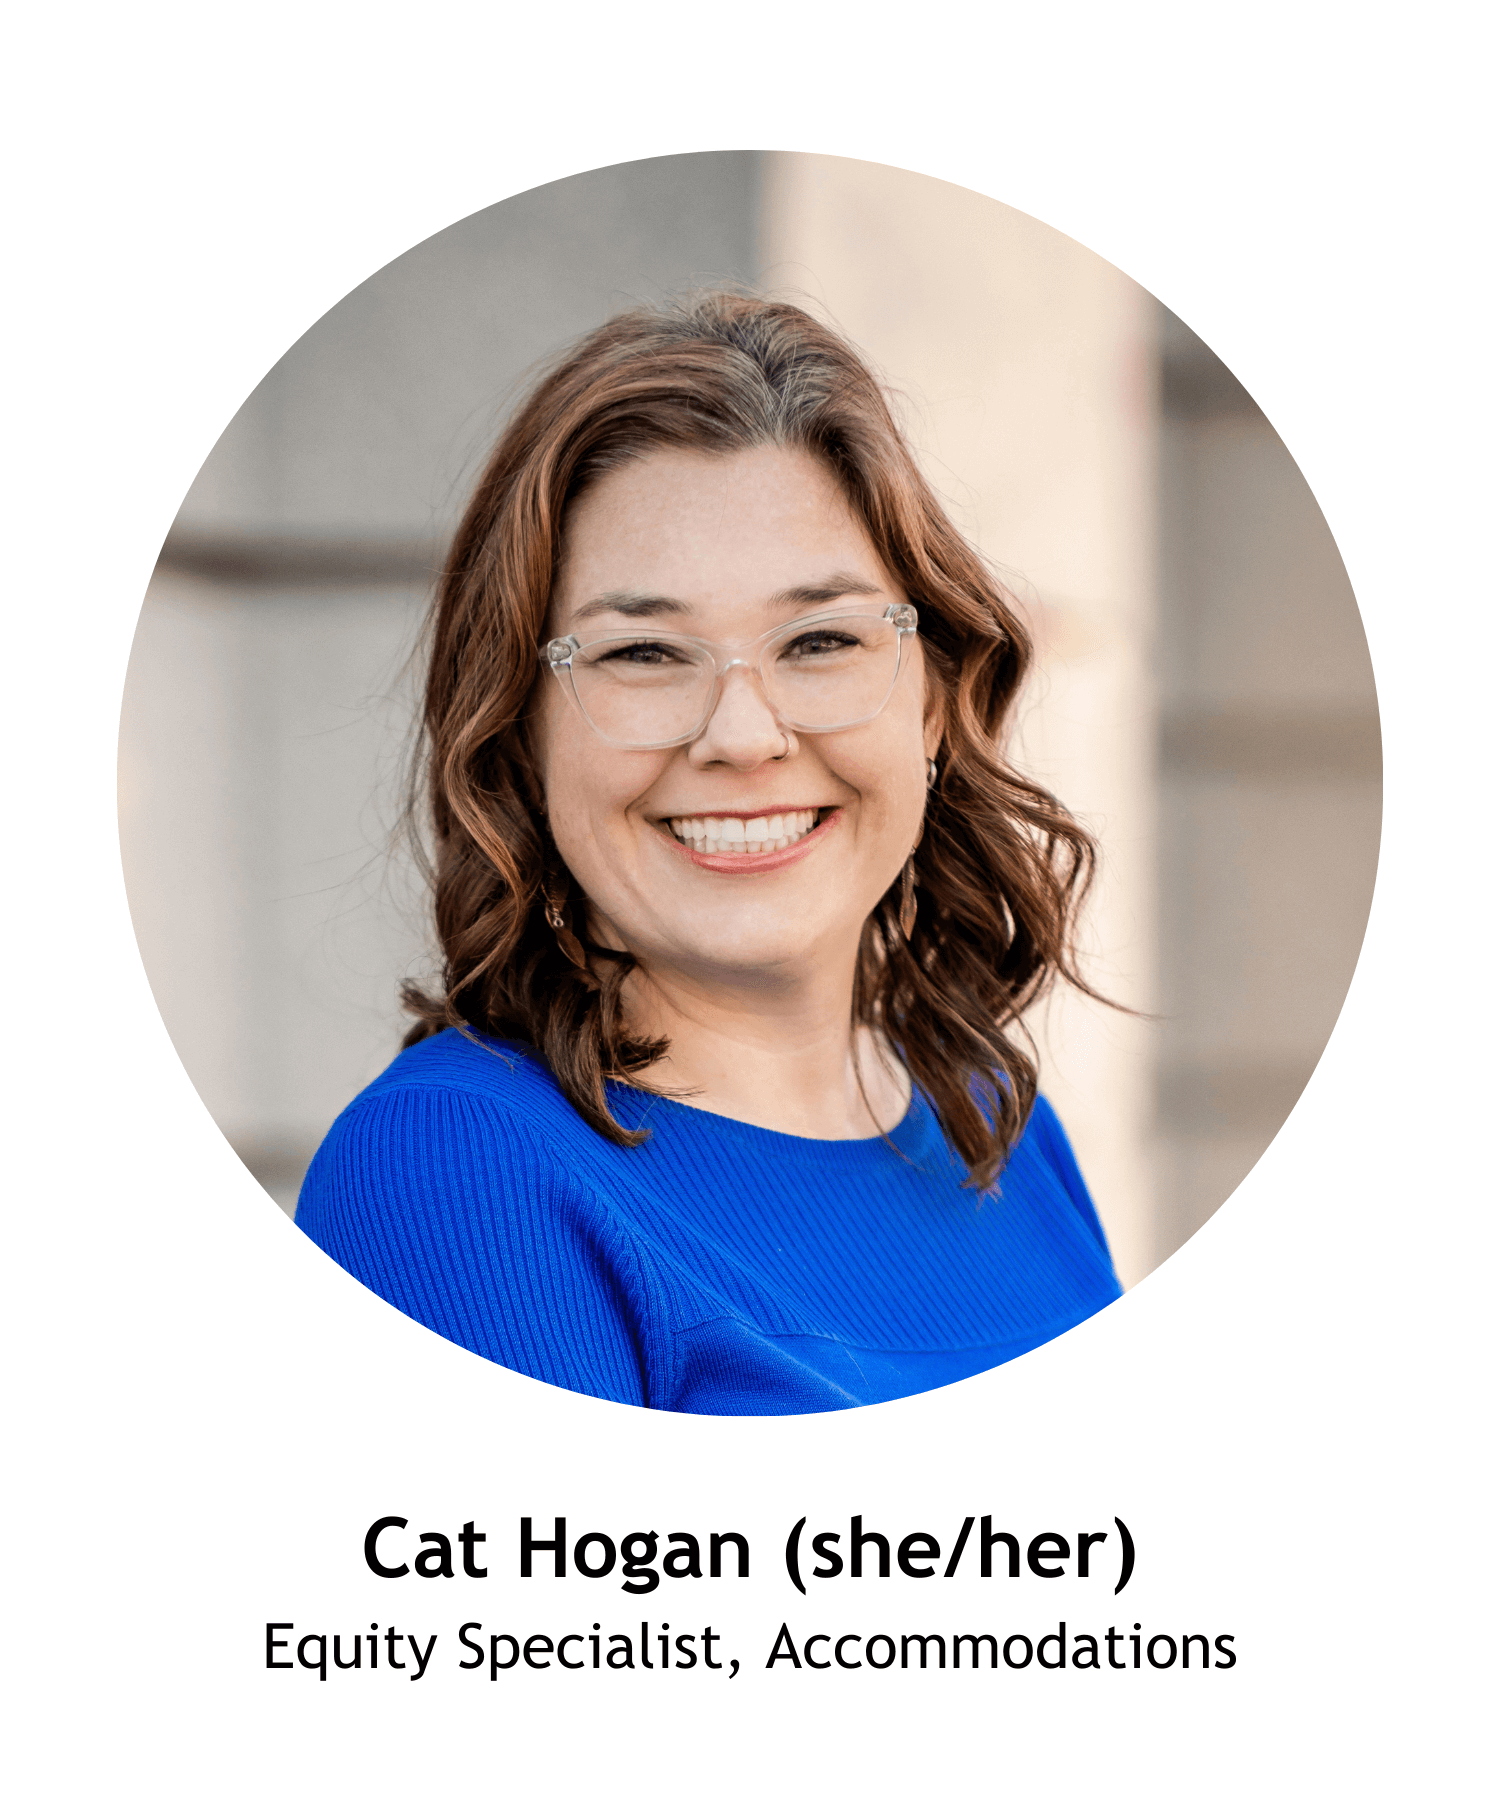 Cat Hogan (she/her), Equity Specialist, Accommodations